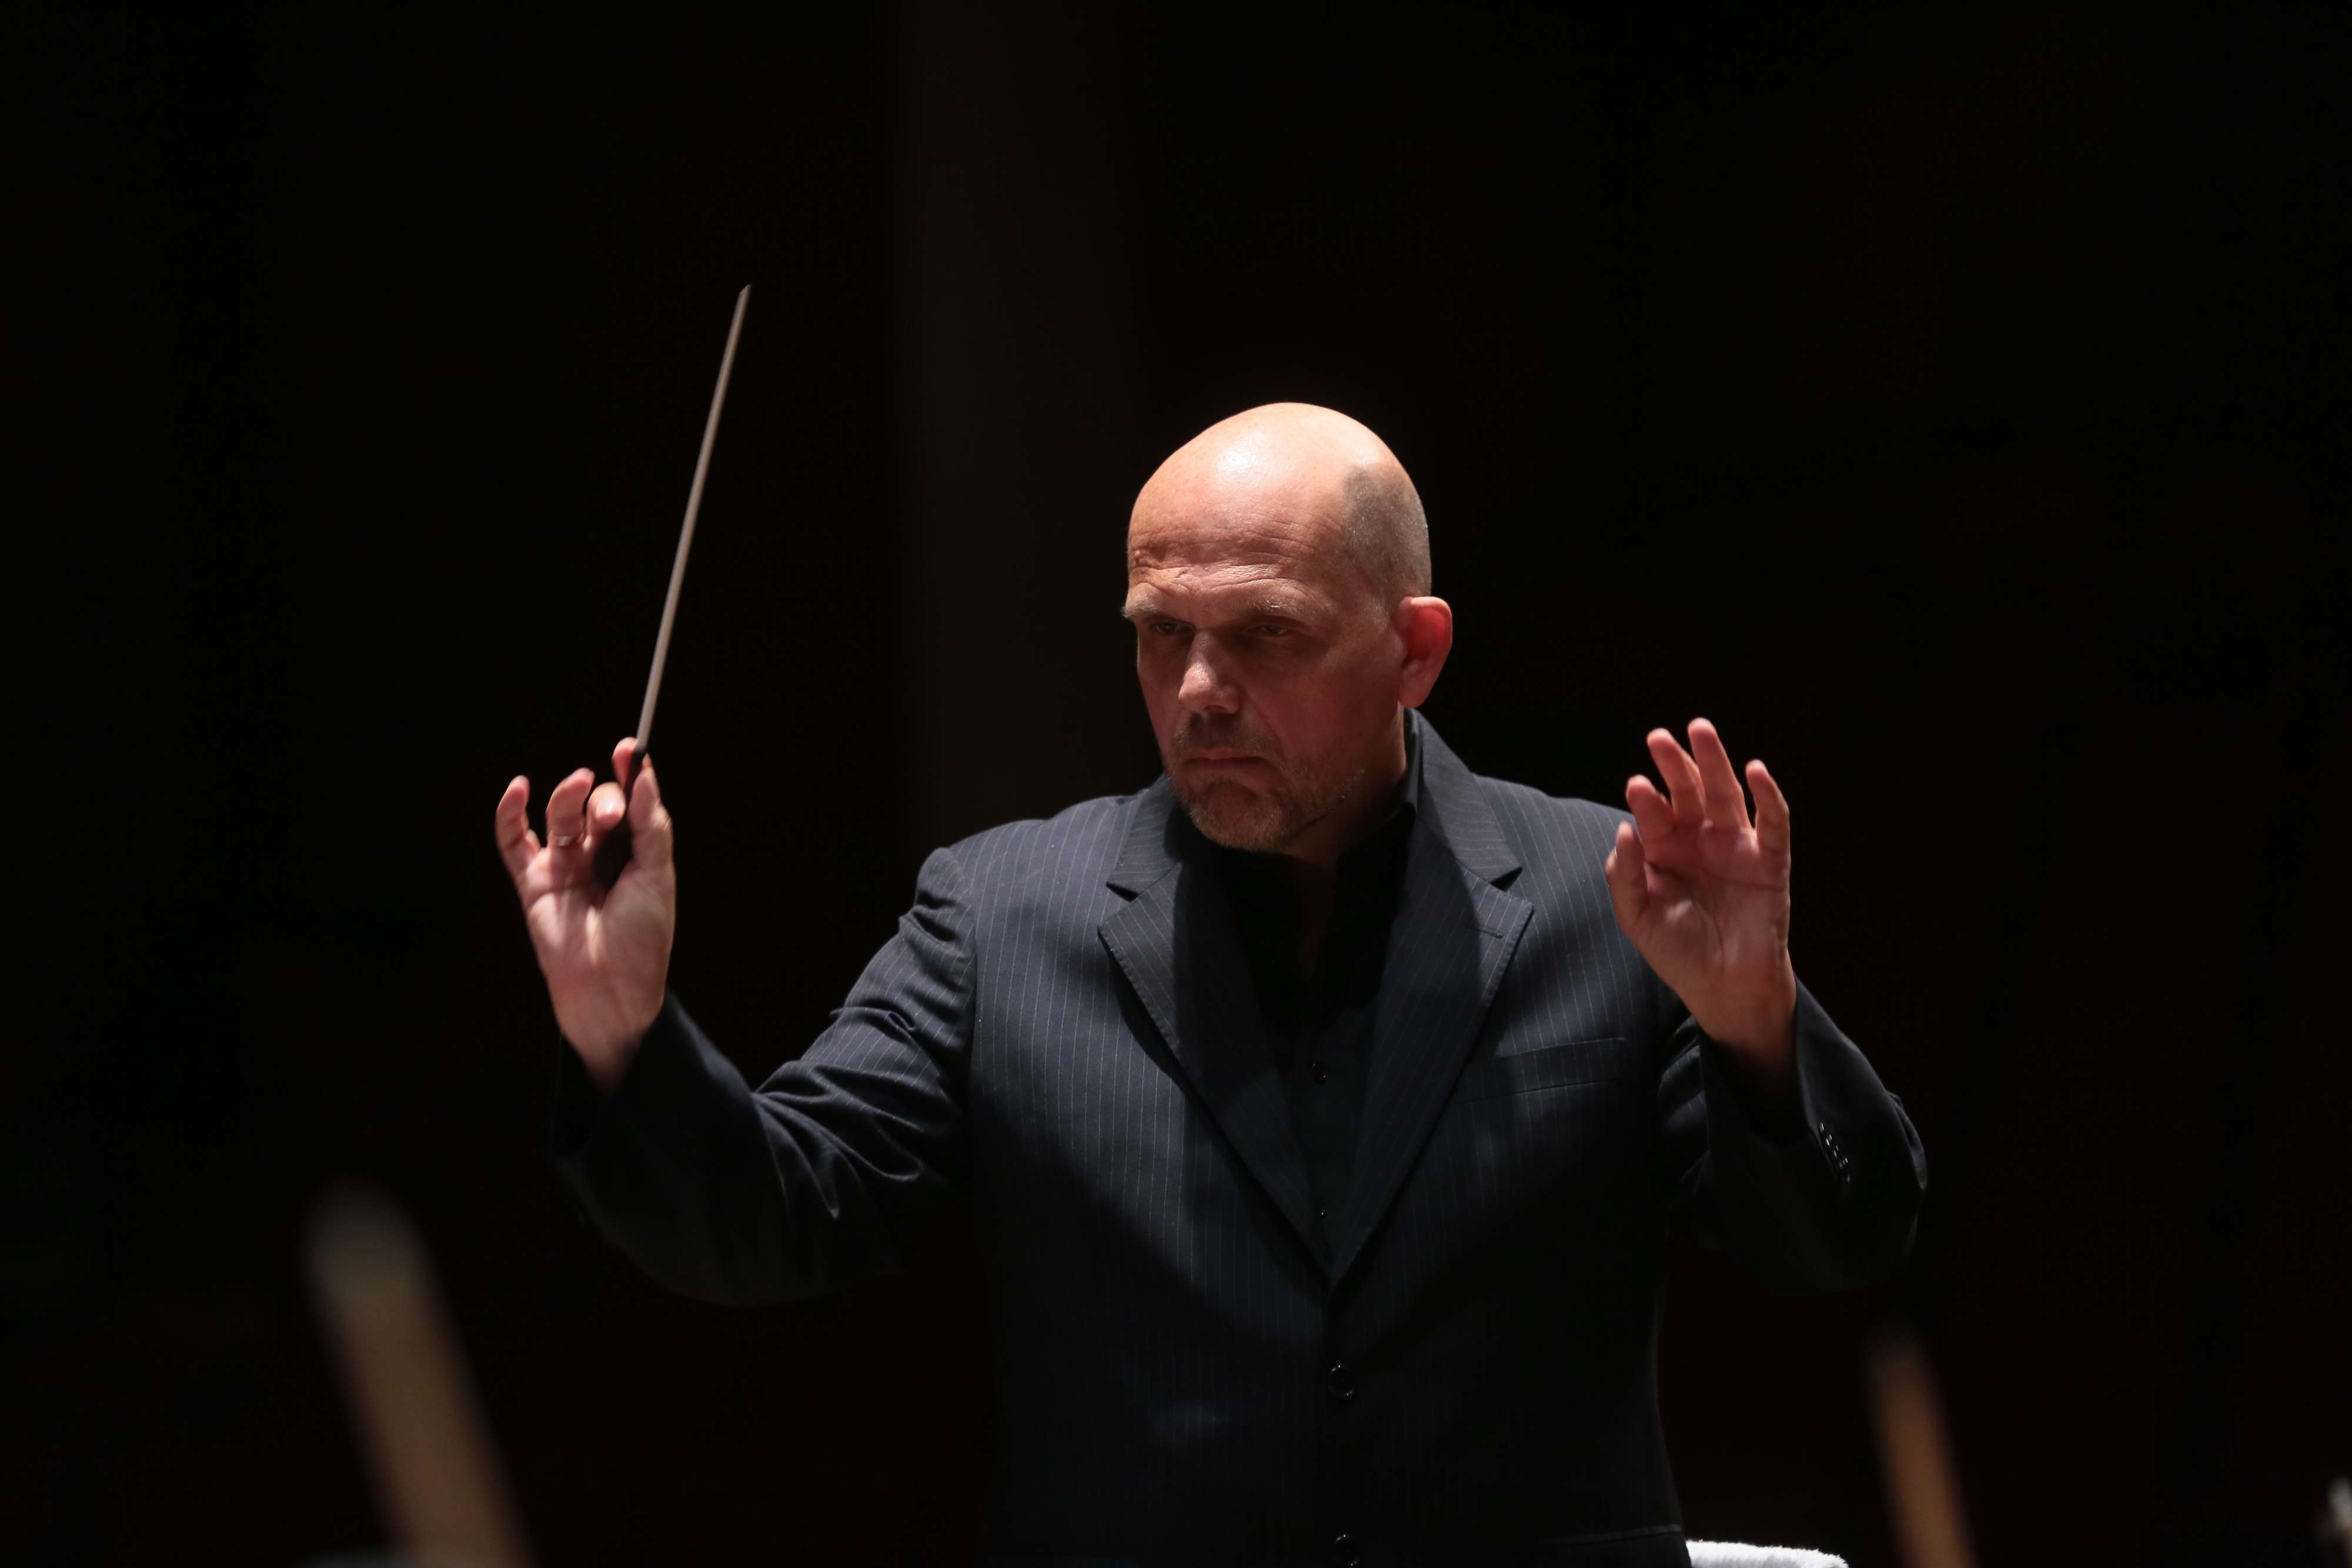 Jaap van Zweden will conduct the Hong Kong Philharmonic Orchestra during the 2016-17 season.